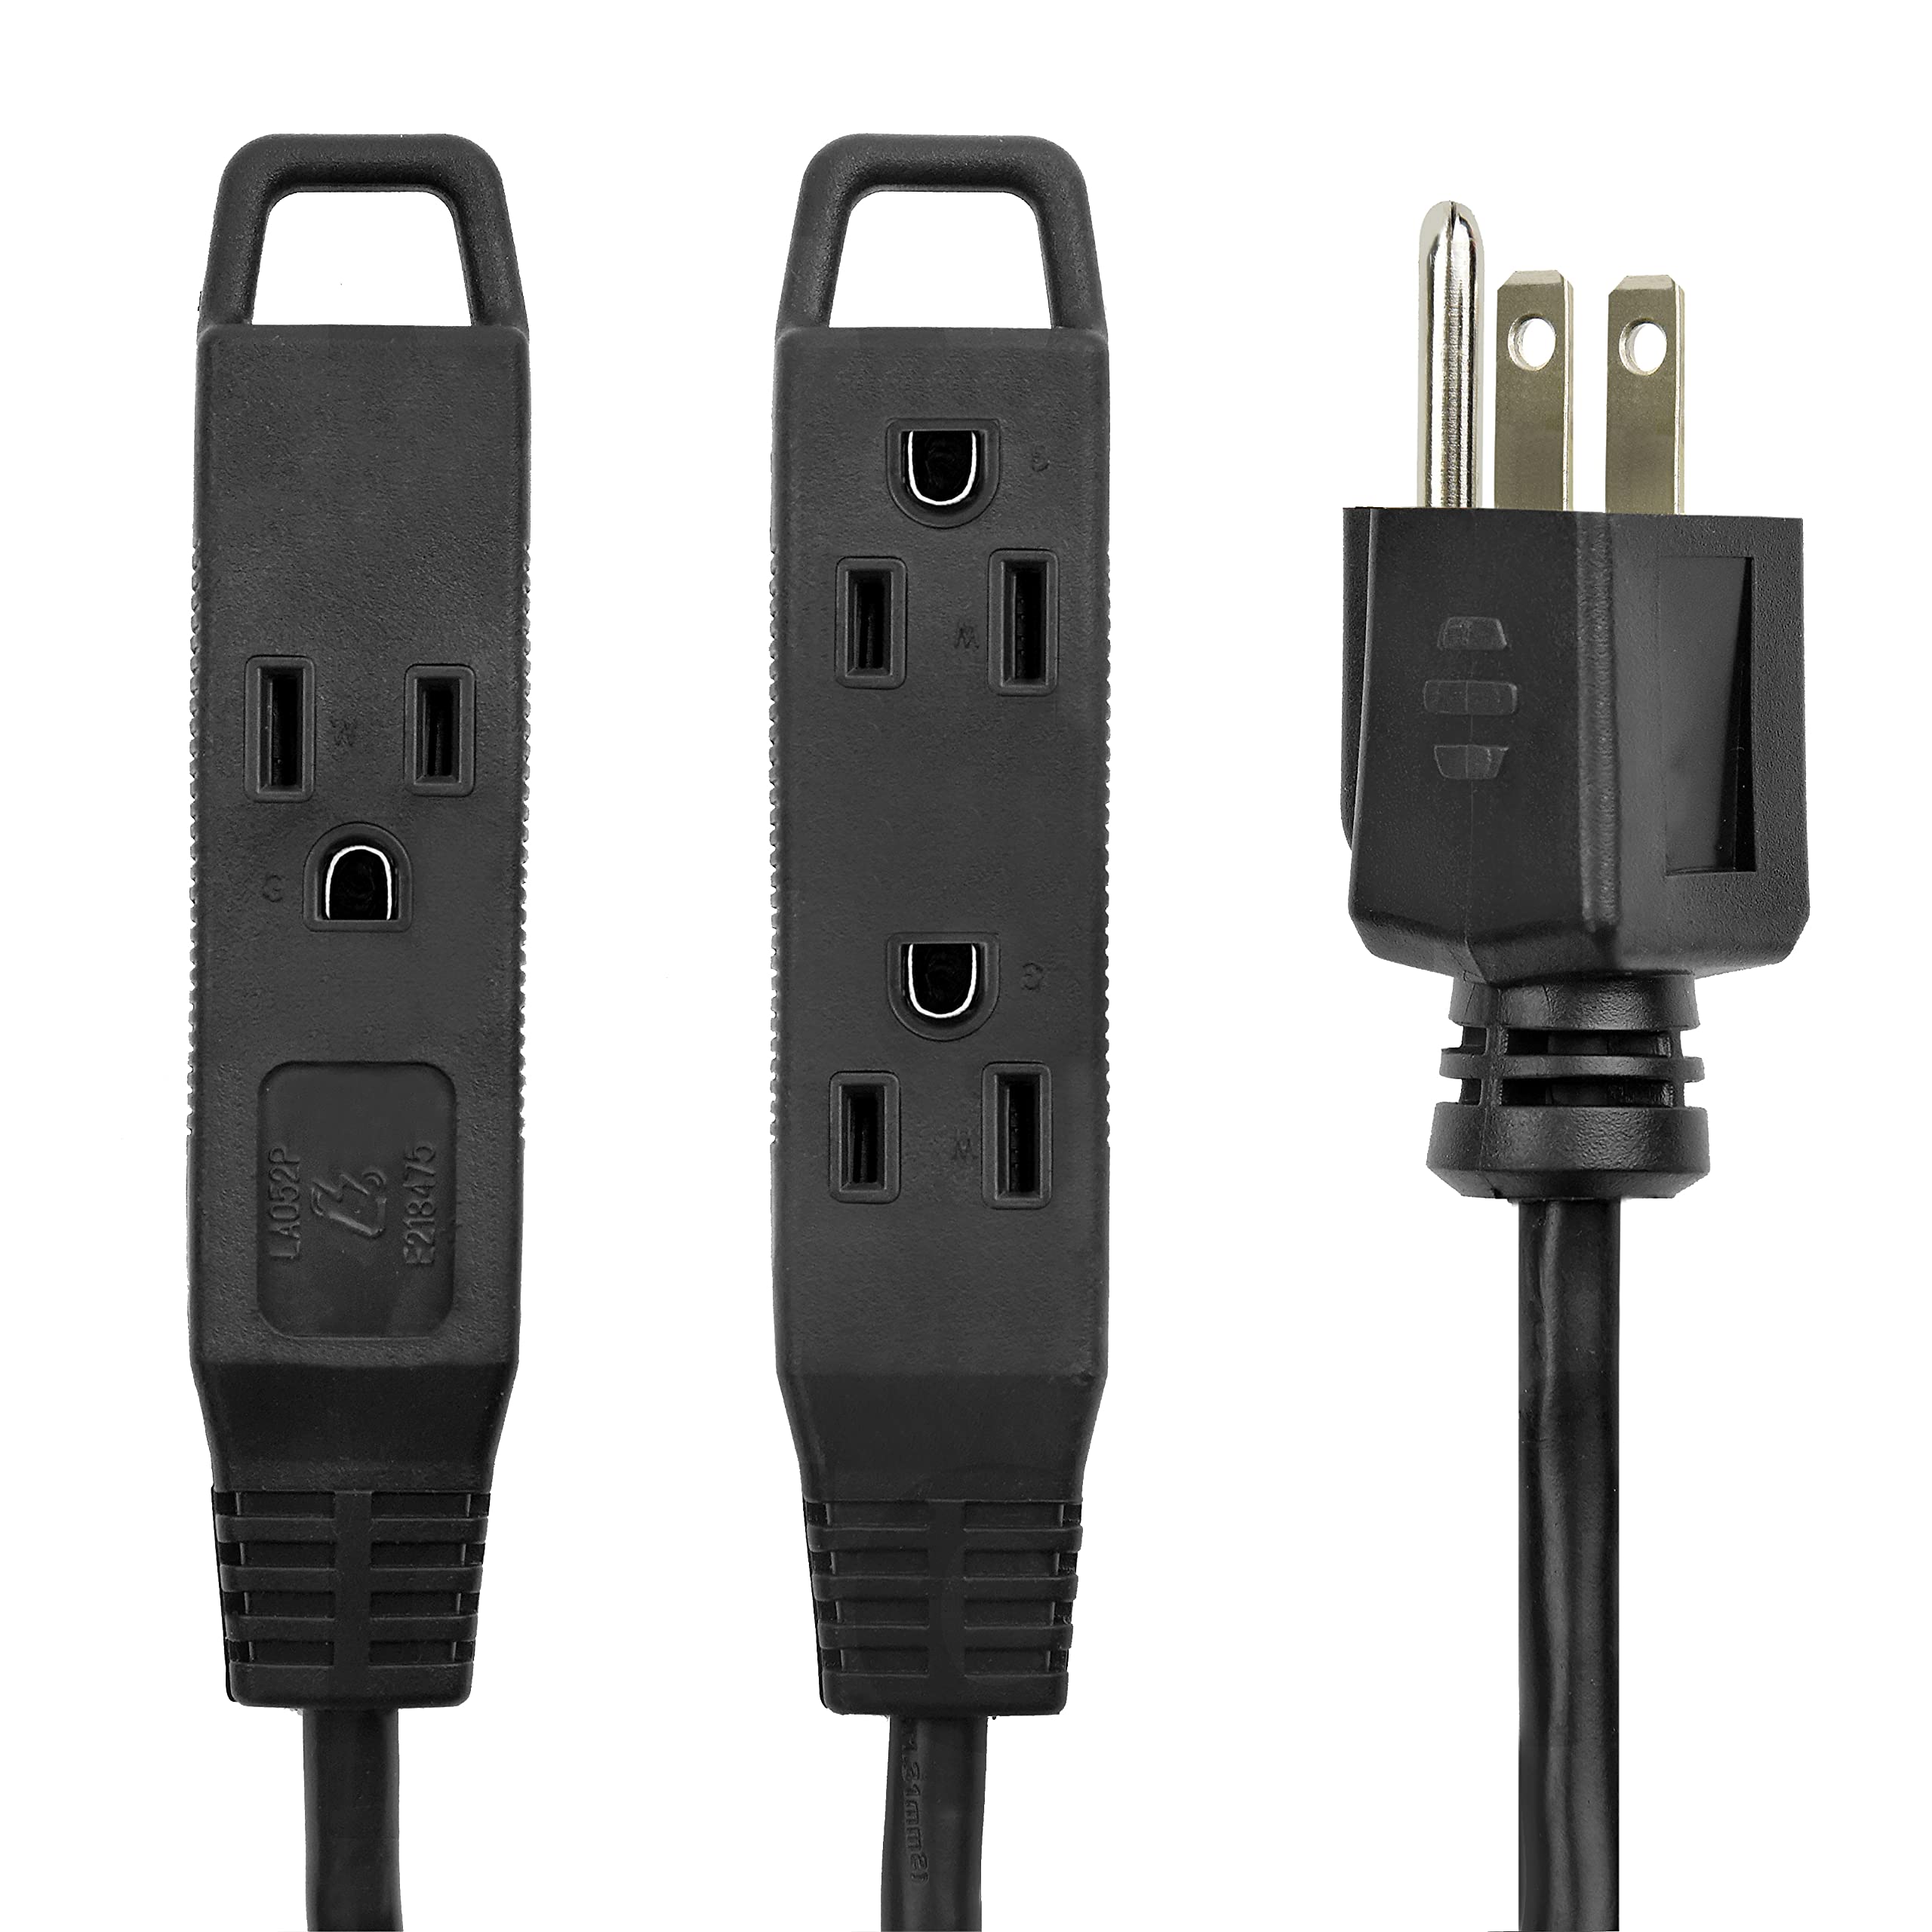 BindMaster Extension Cord/Wire Power Cable, 16/3, 3 Outlet, UL Listed, Black  - Good